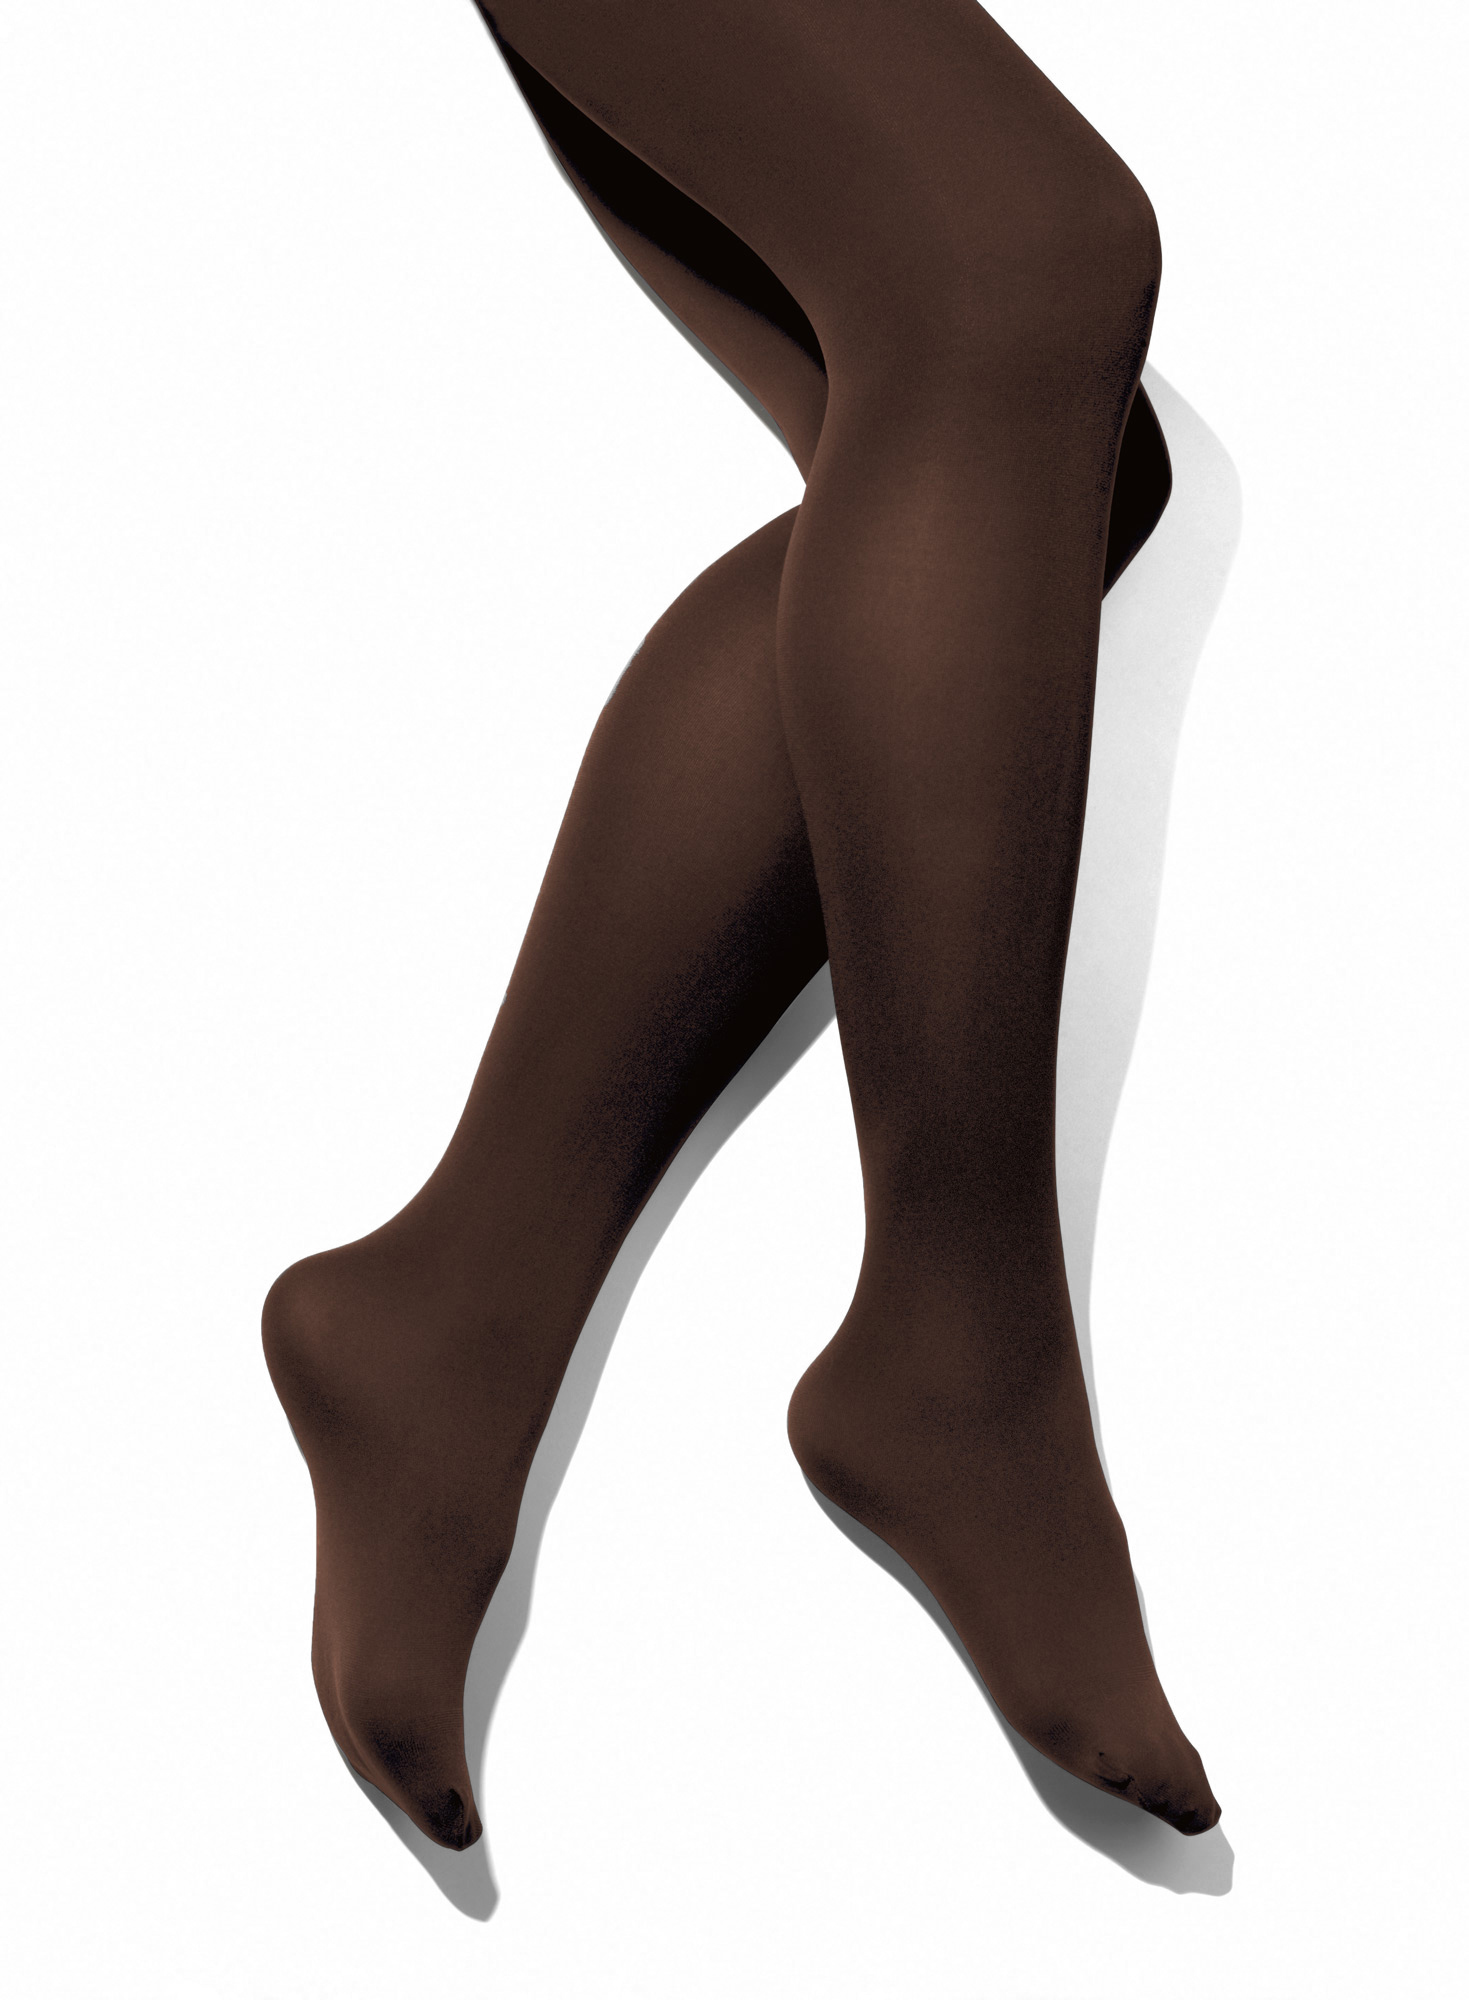 Spanx Luxe Leg Shaping Tights, 15 Quality Pairs of Tights, So You Don't  Have to Store Your Dresses